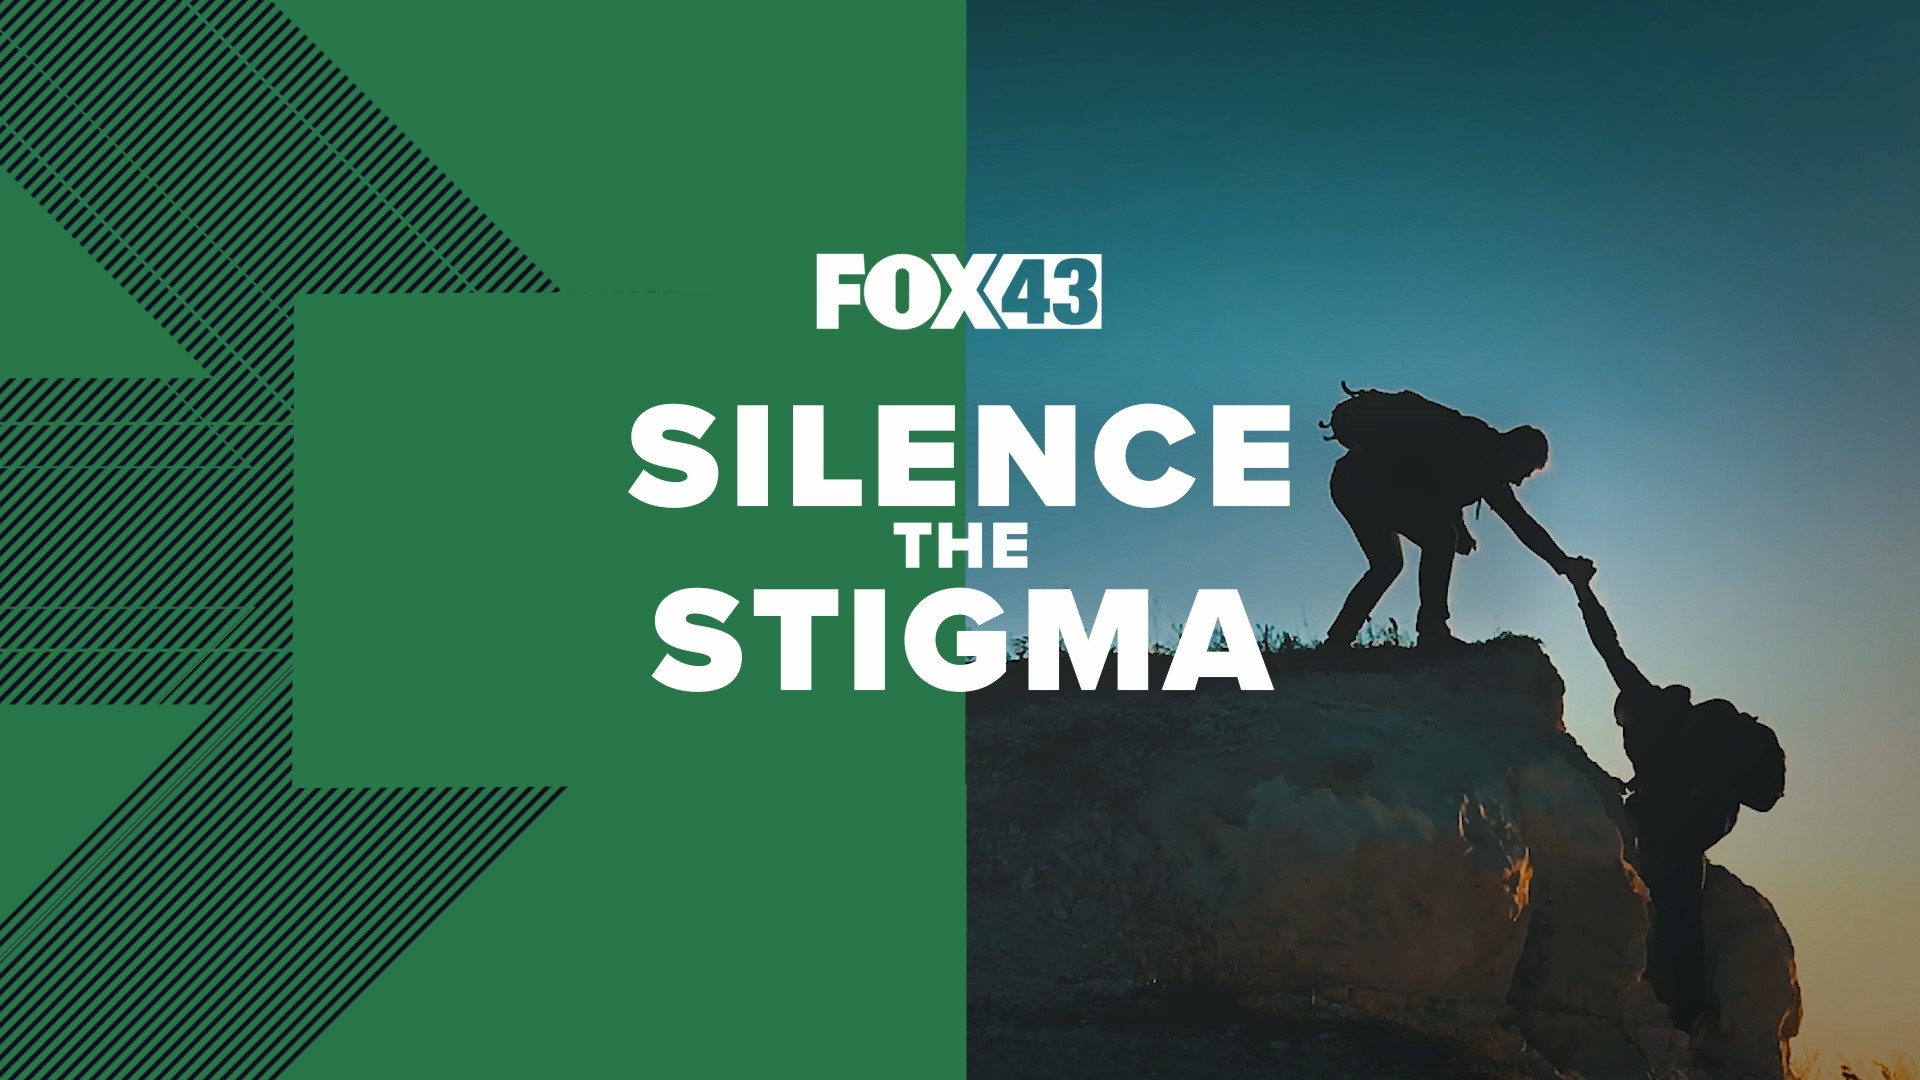 This FOX43 News special dives into the state of mental health in Pennsylvania, including the diagnosis and treatment options available today.